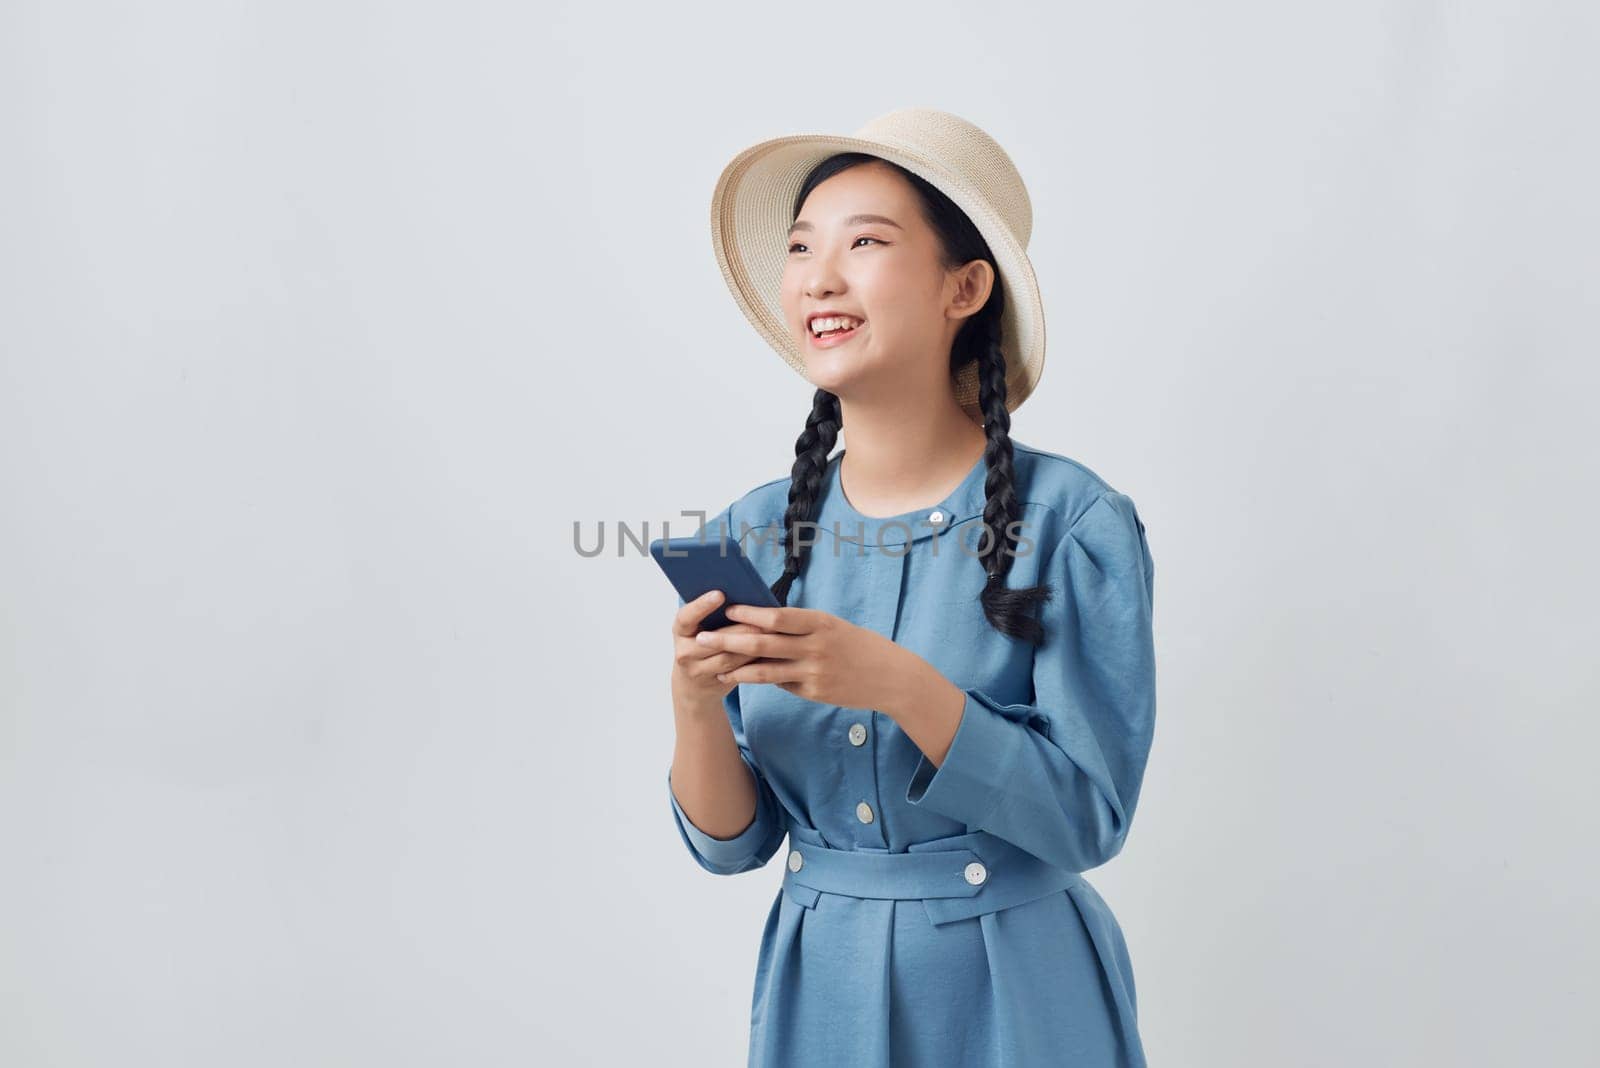 Smiling woman in denim dress using mobile phone by makidotvn